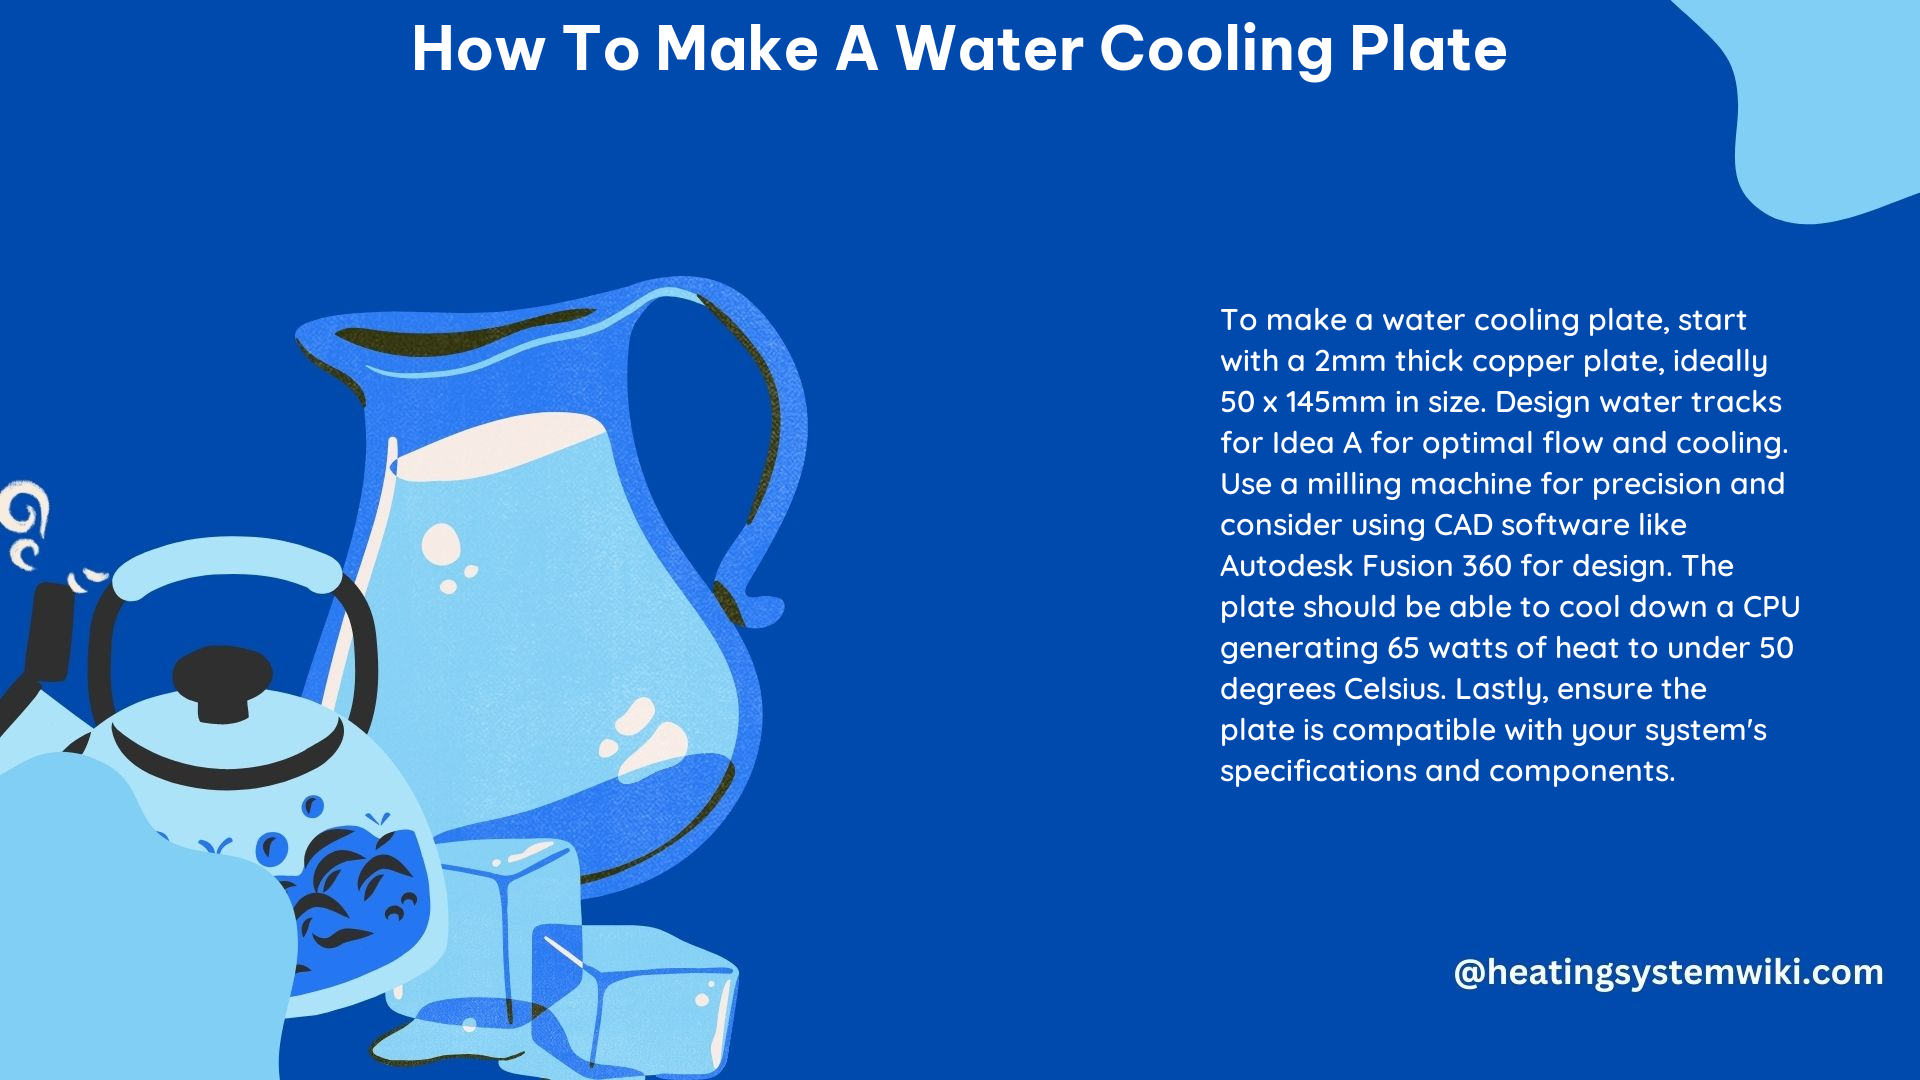 How to Make a Water Cooling Plate